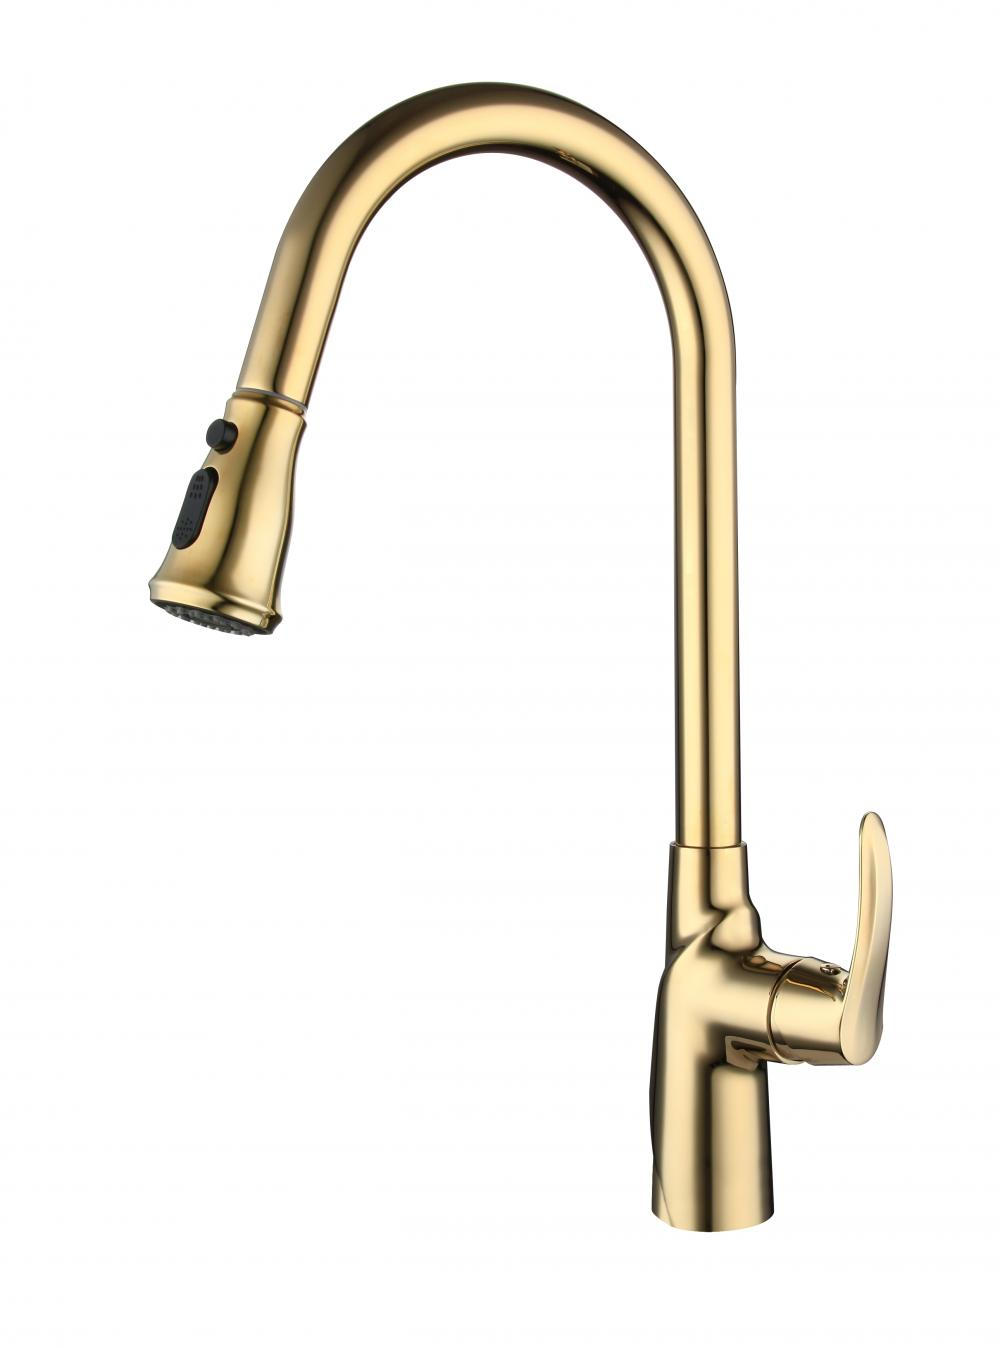 Brass Gold Pull Down Kitchen Faucets For Sink